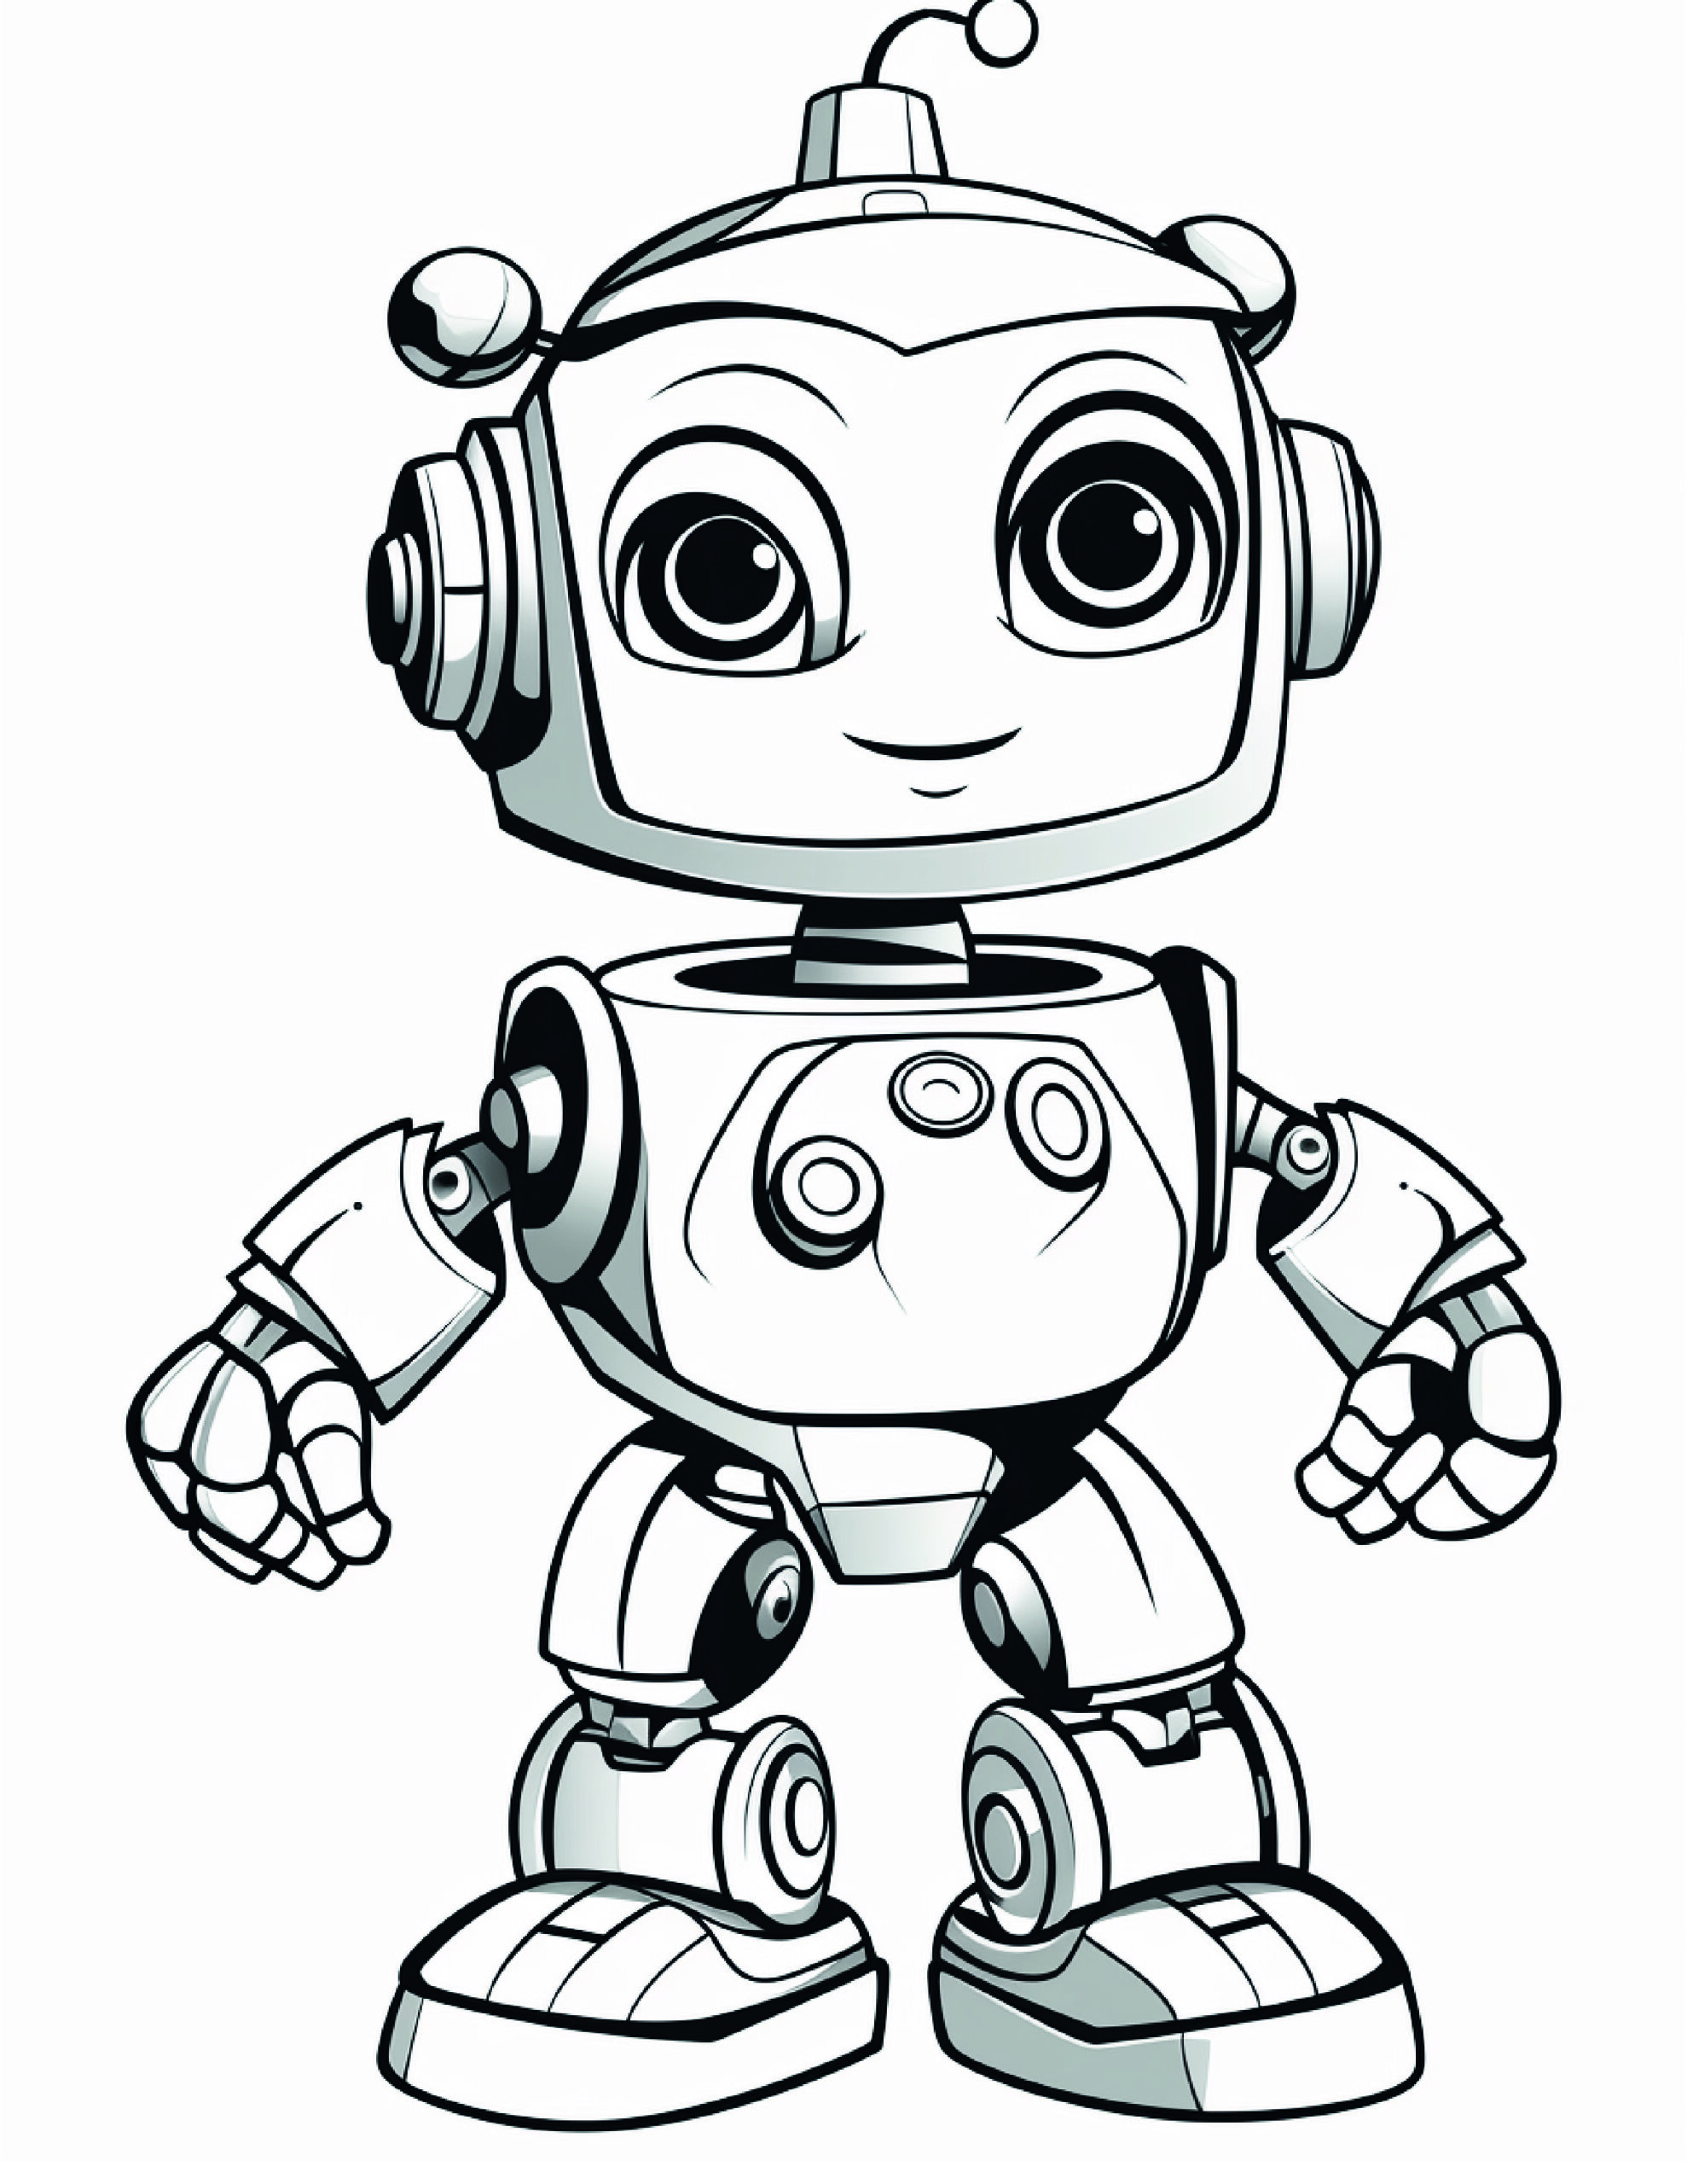 Robot Coloring Page 2 - A line drawing of a little robot. 